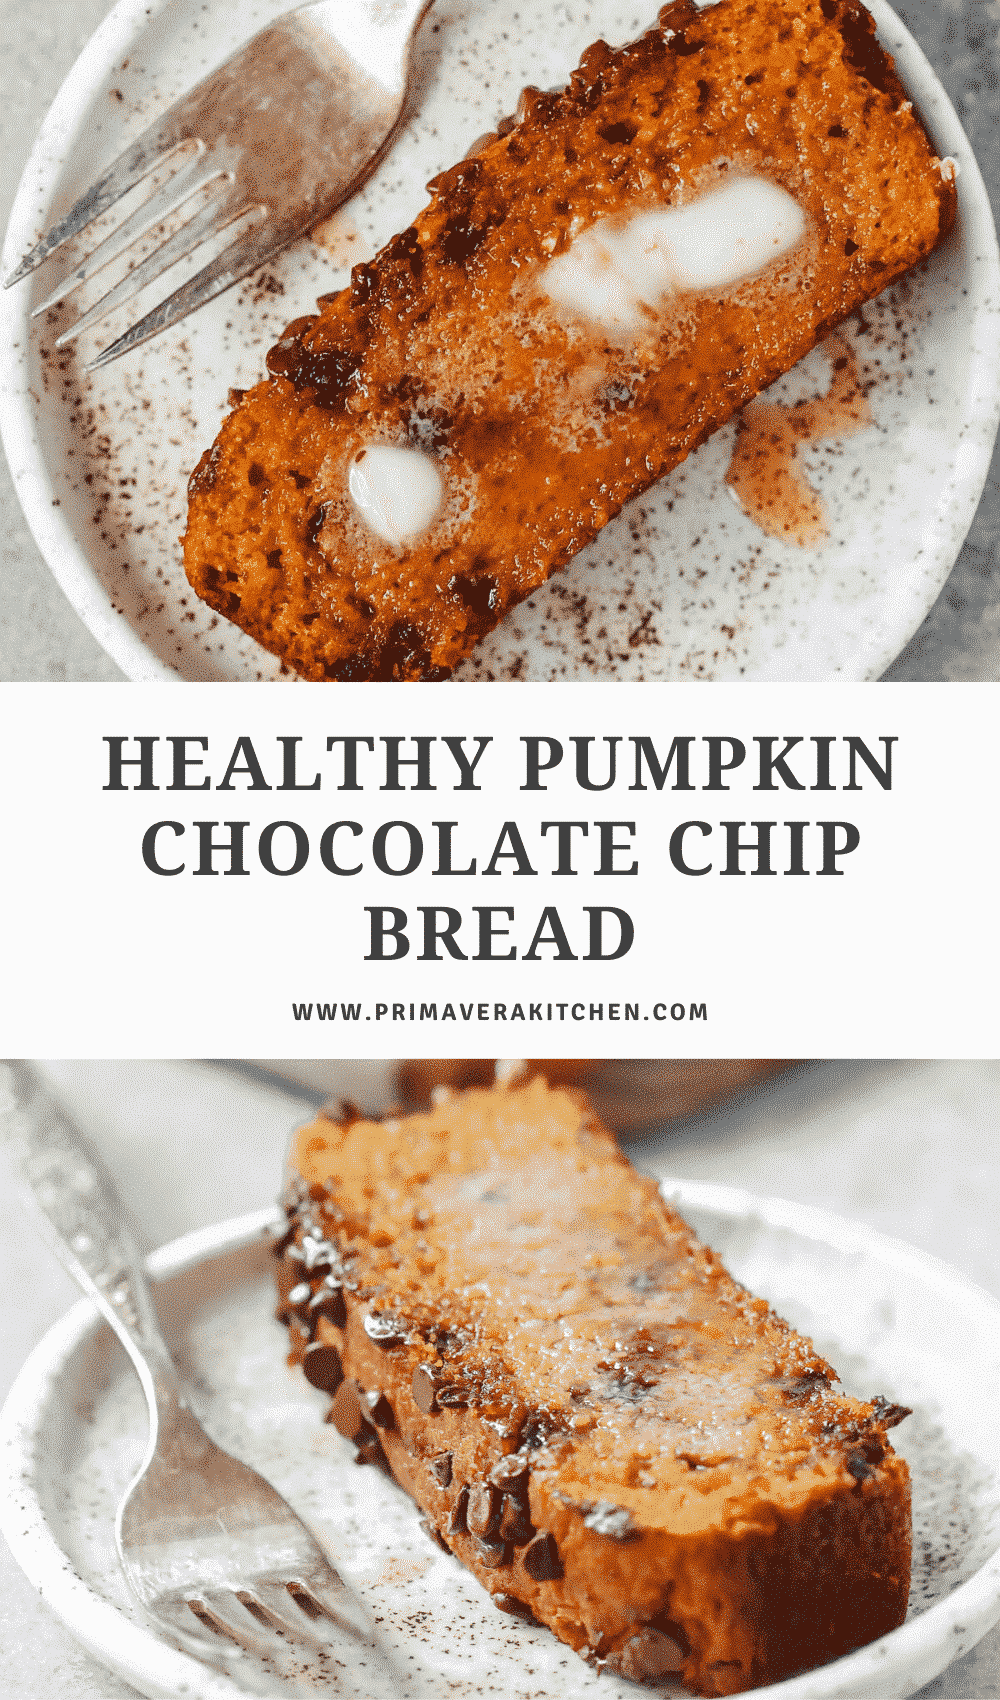 titled photo collage (and shown): Healthy Pumpkin Chocolate Chip Bread 